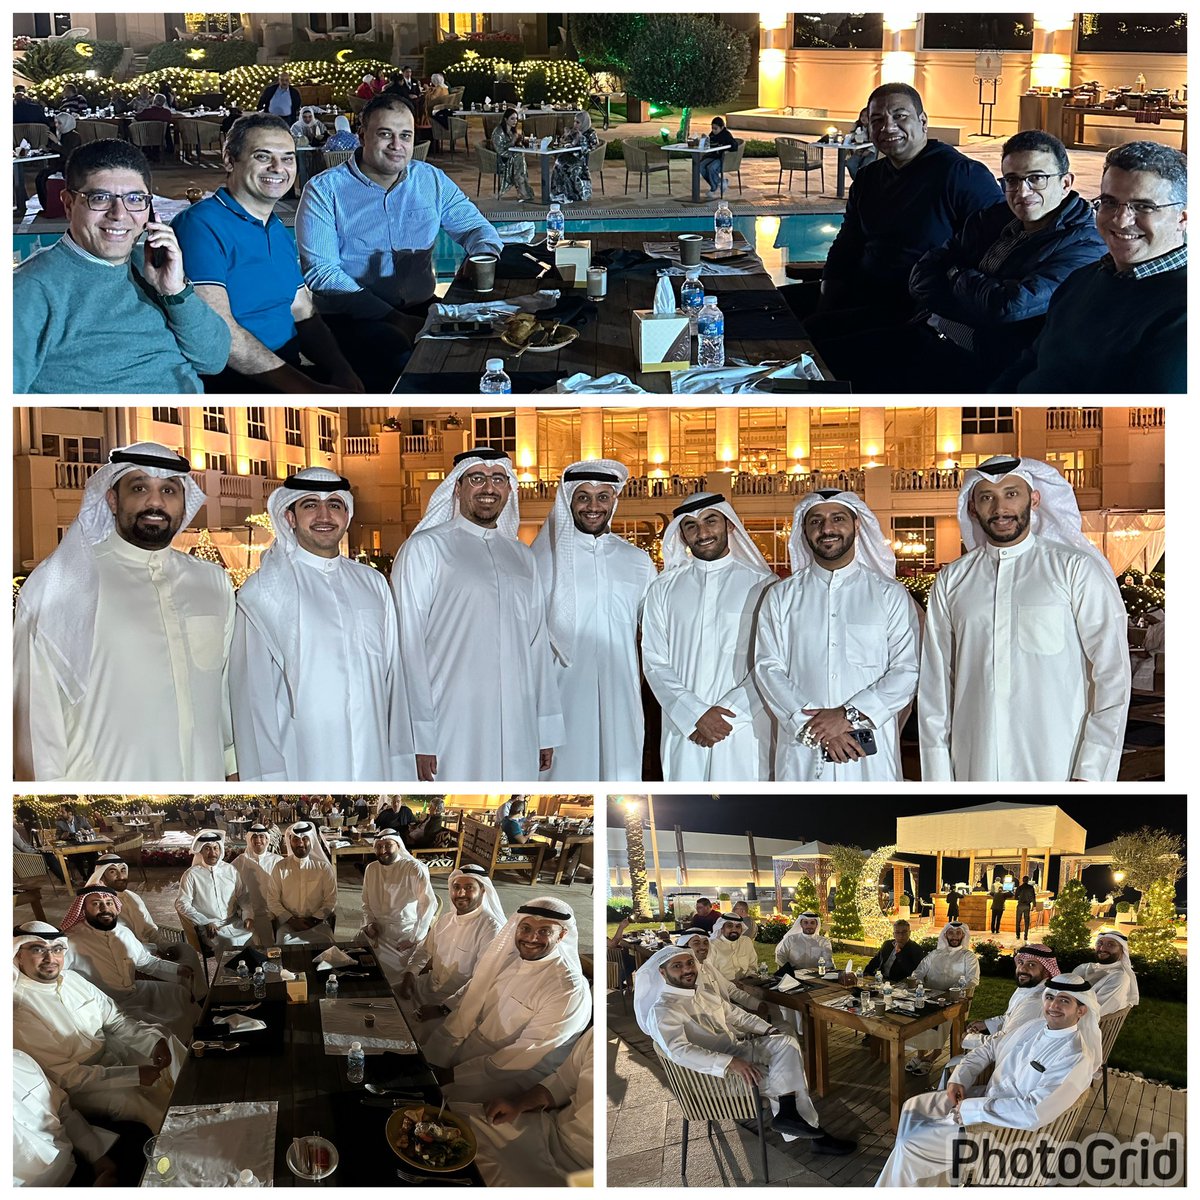 We enjoyed the social #Ramadan event “KUA Ghabga” with urologists from different hospitals in Kuwait.